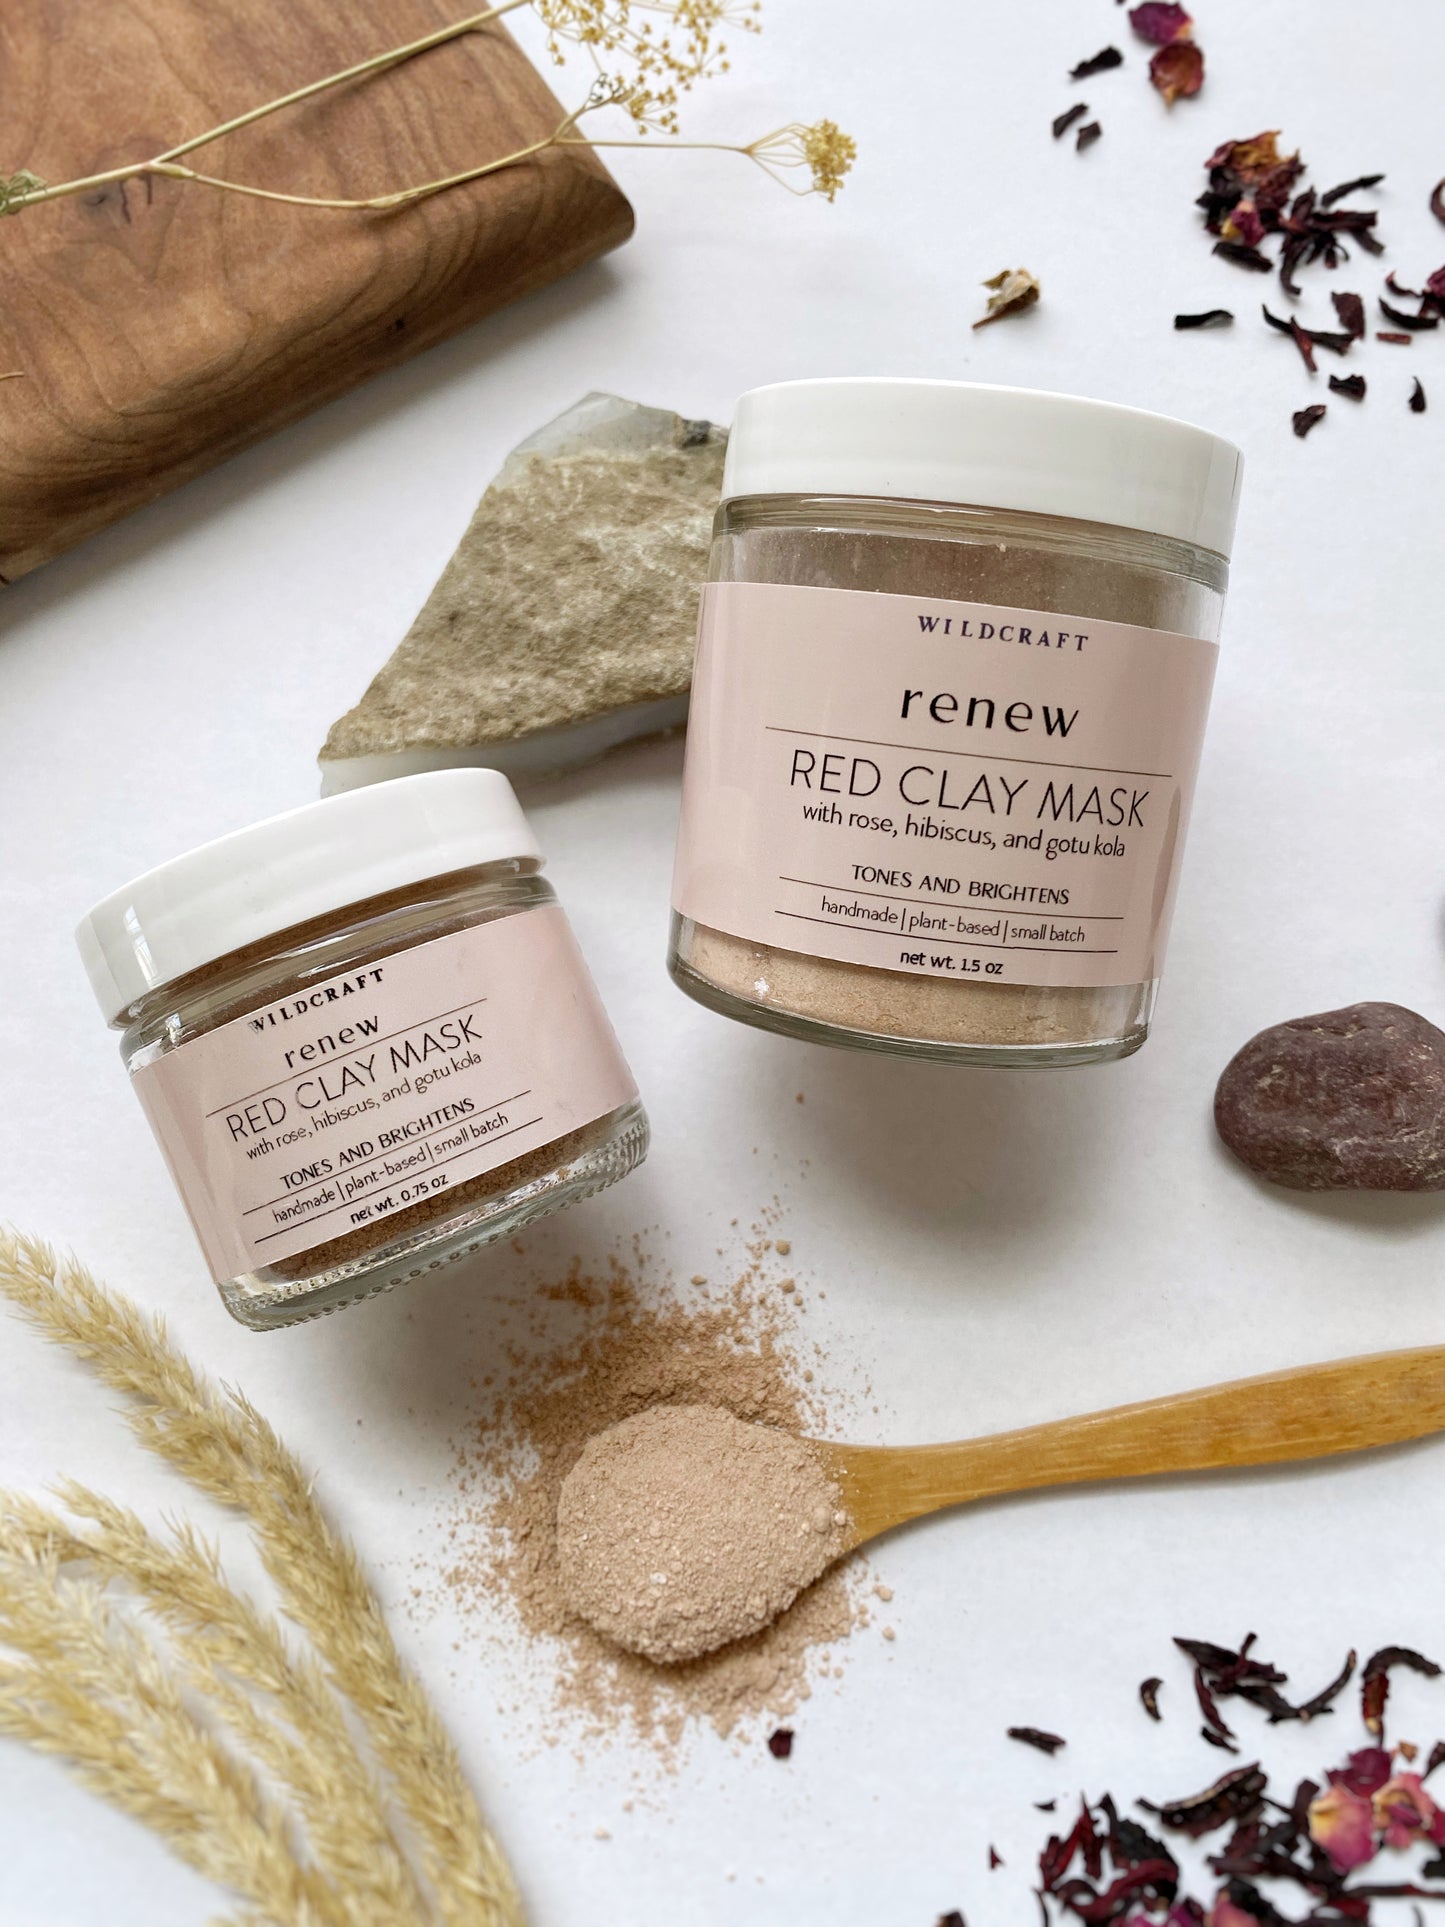 A revitalizing clay face mask powder made with red clay and botanicals to support a youthful radiant complexion. Packed with antioxidants, this mask helps to protect, repair, and brighten the skin while encouraging collagen production, and evening skin tone. Great for all skin types, especially mature skin.